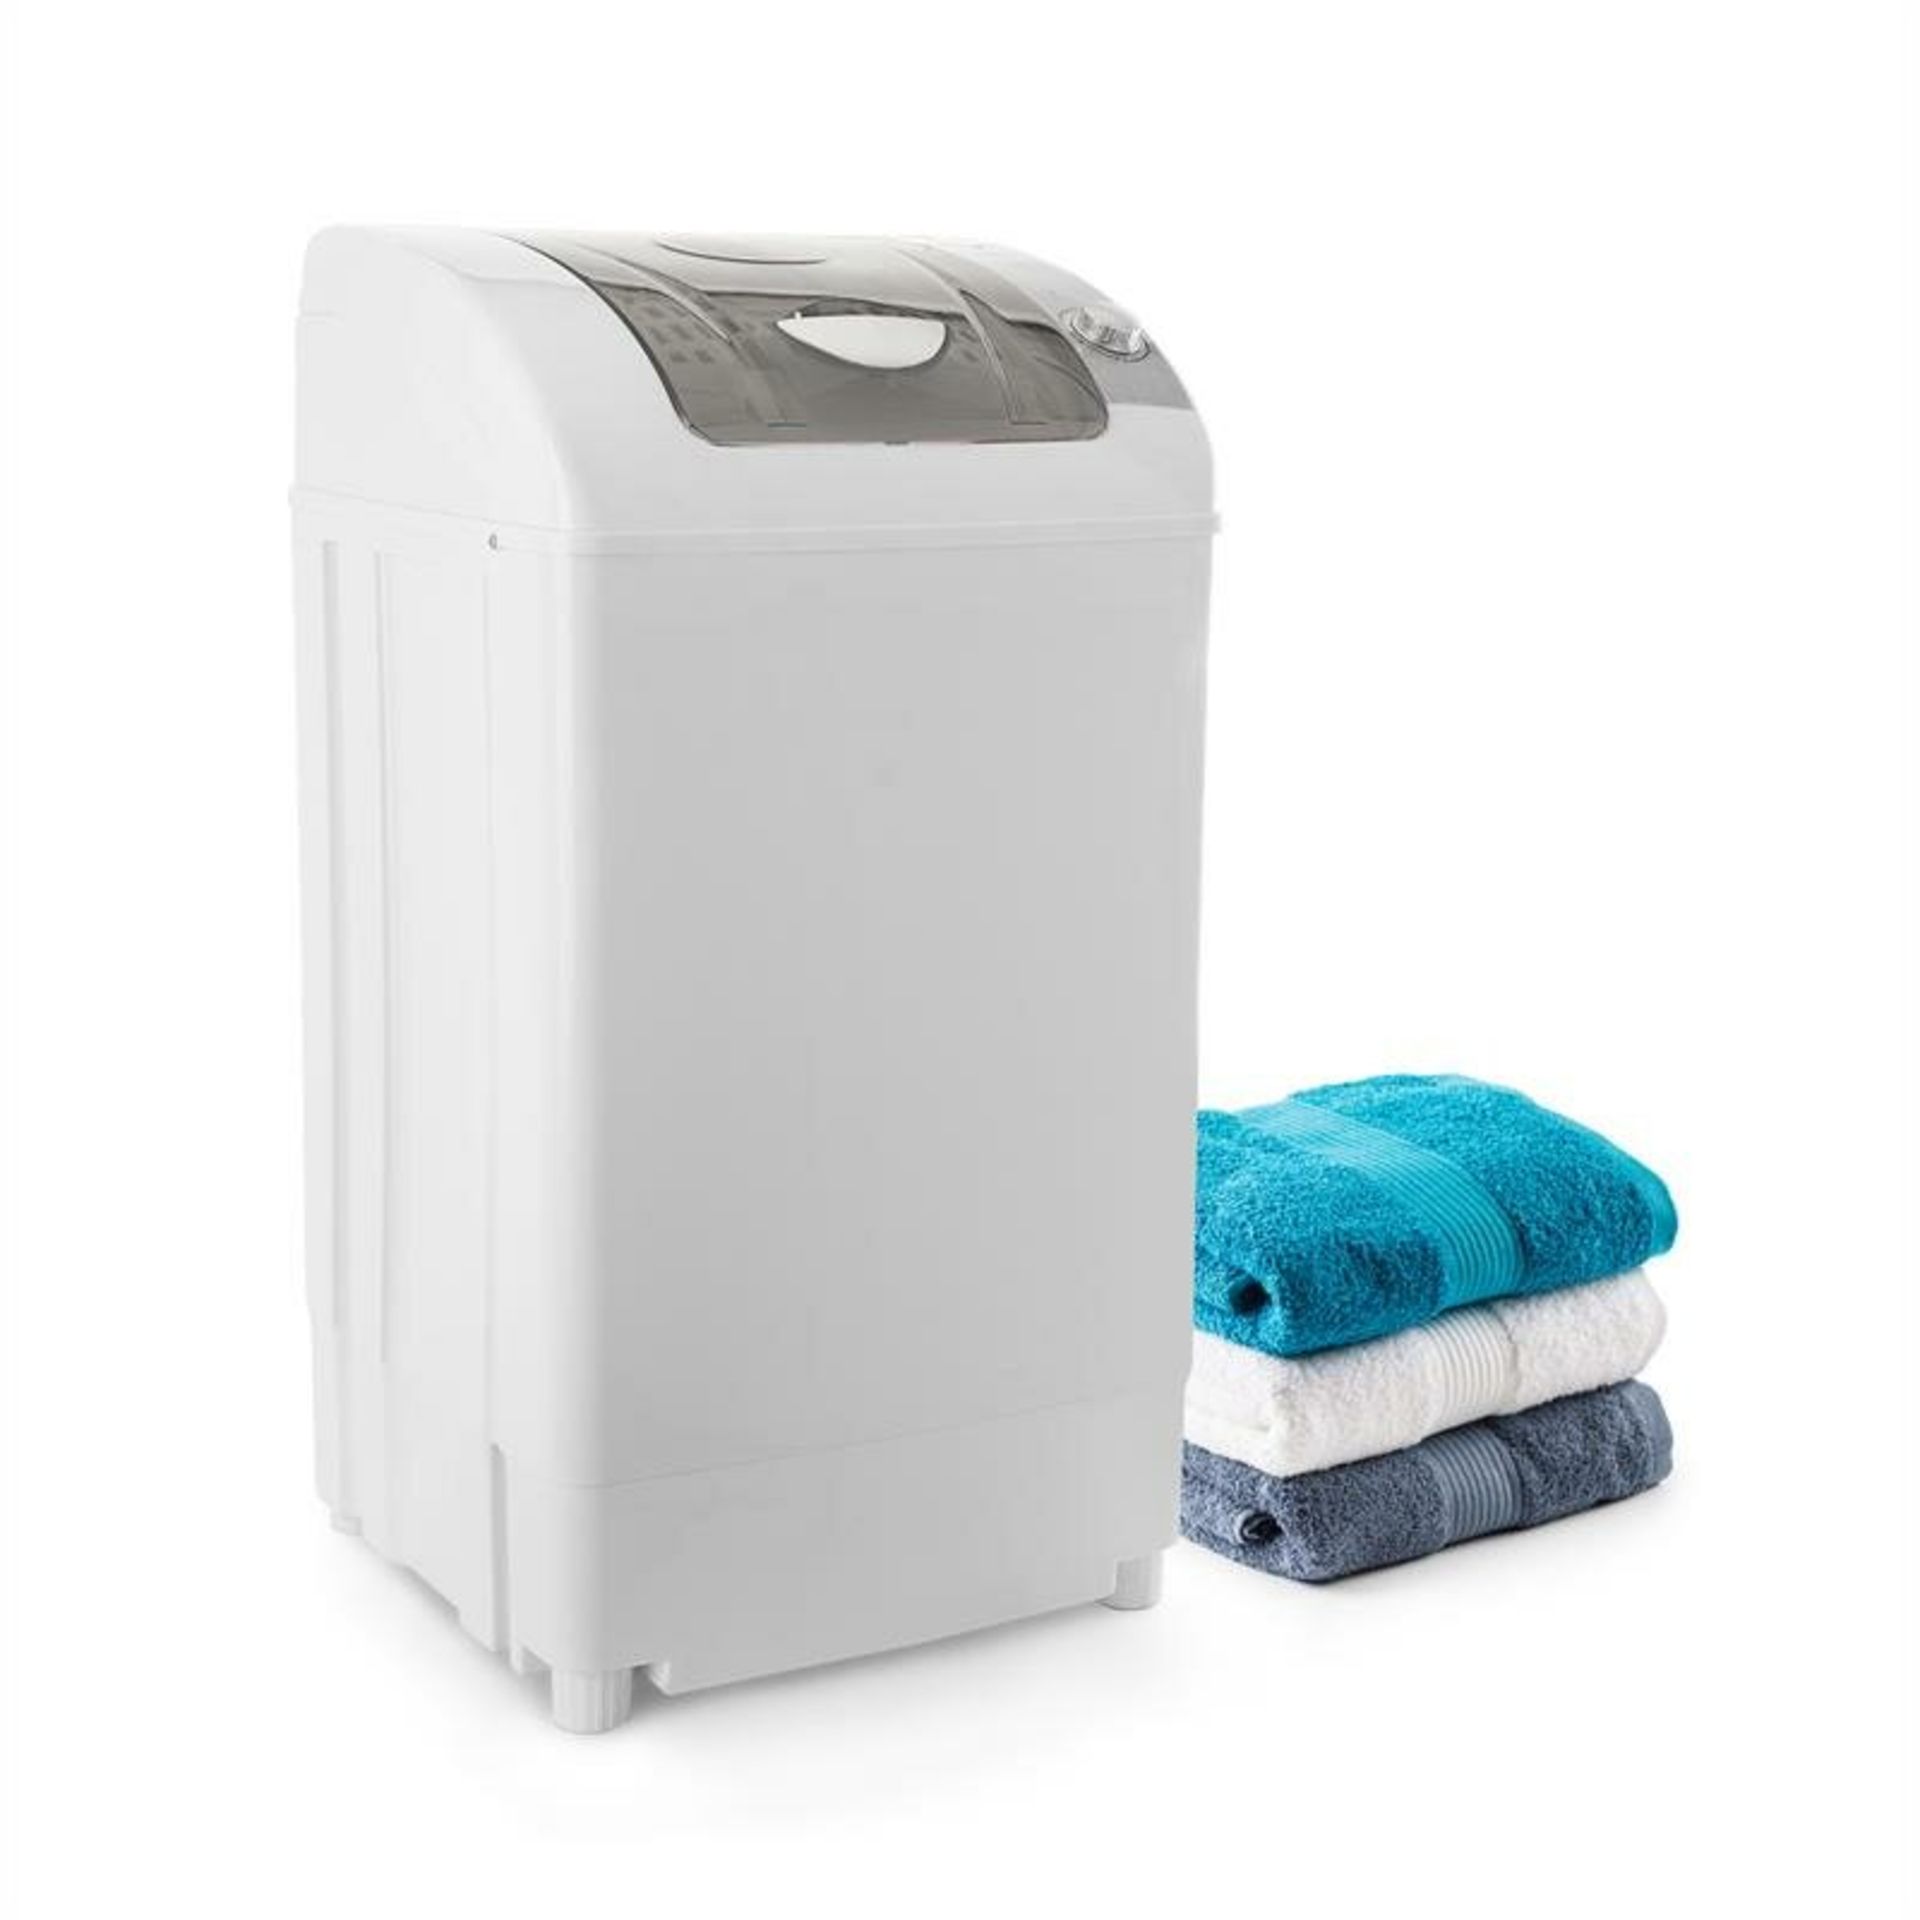 Top Spin Family 3.8kg Dryer RRP £119.99